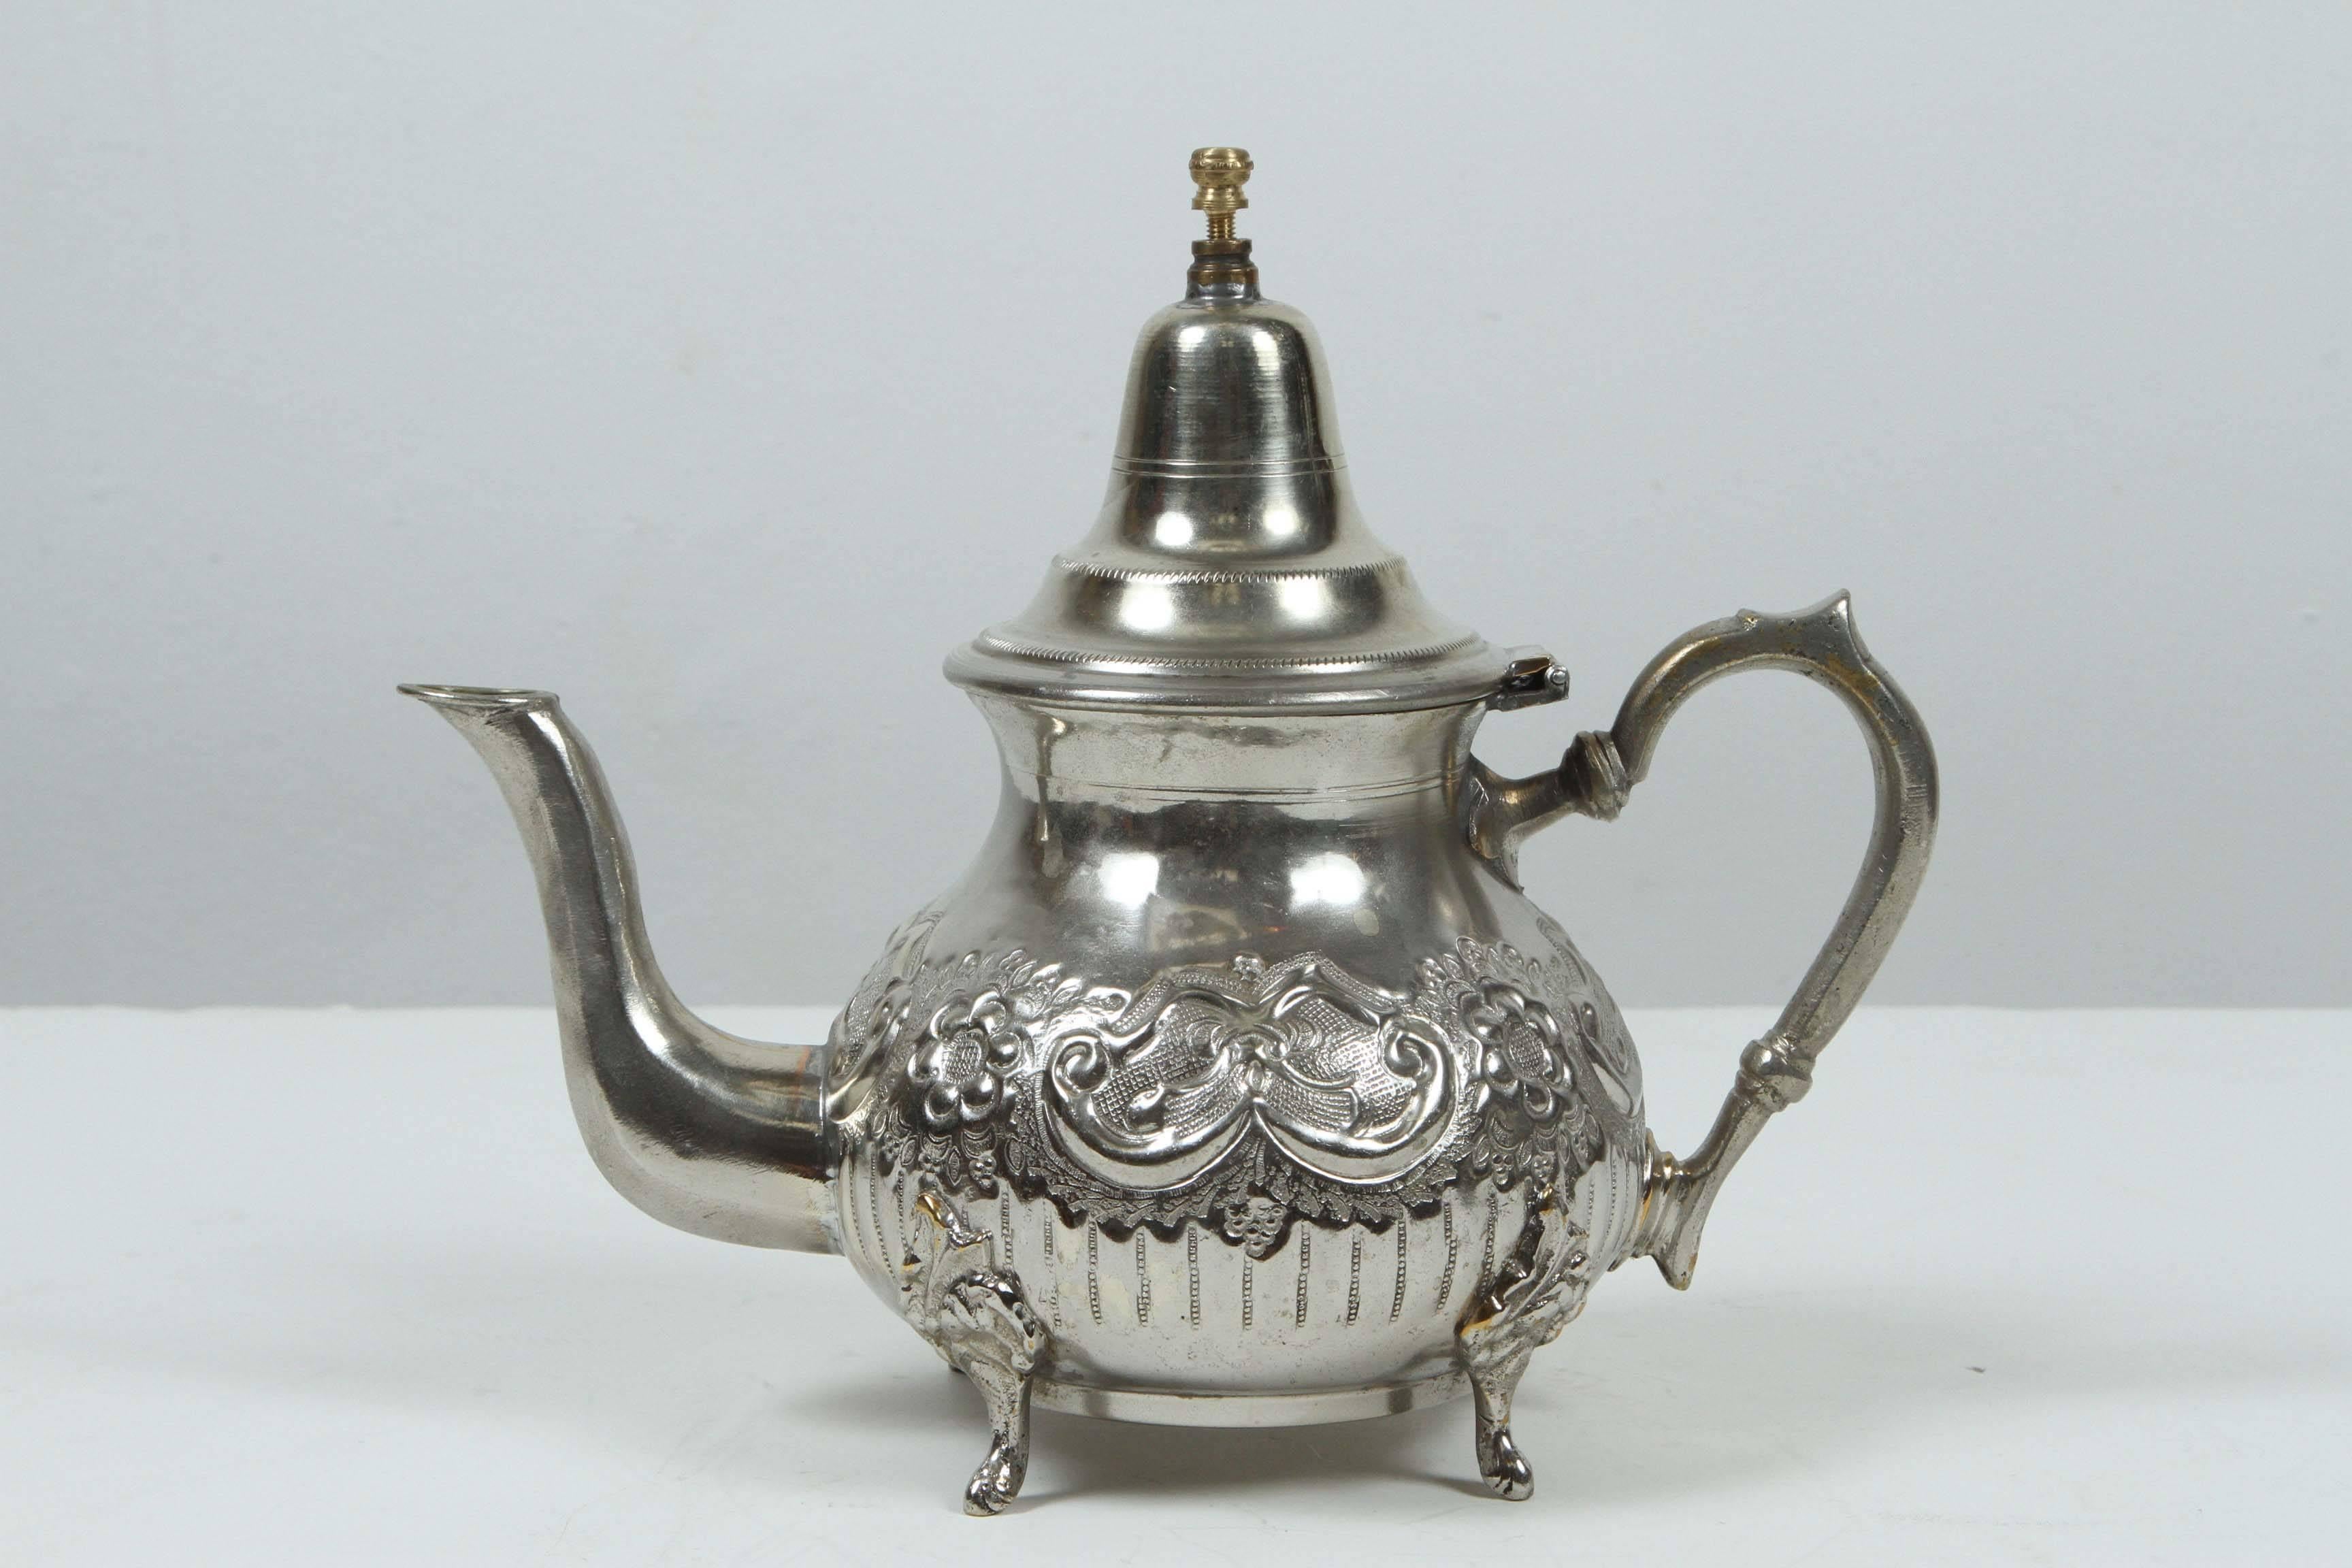 Traditional vintage silvered-metal and brass Moroccan tea pot, embossed with traditional repousse design, nicely aged, handcrafted in Fez, stamped in bottom.
Great silver plated and brass decorative Islamic art object.
Will make a great gift.
2